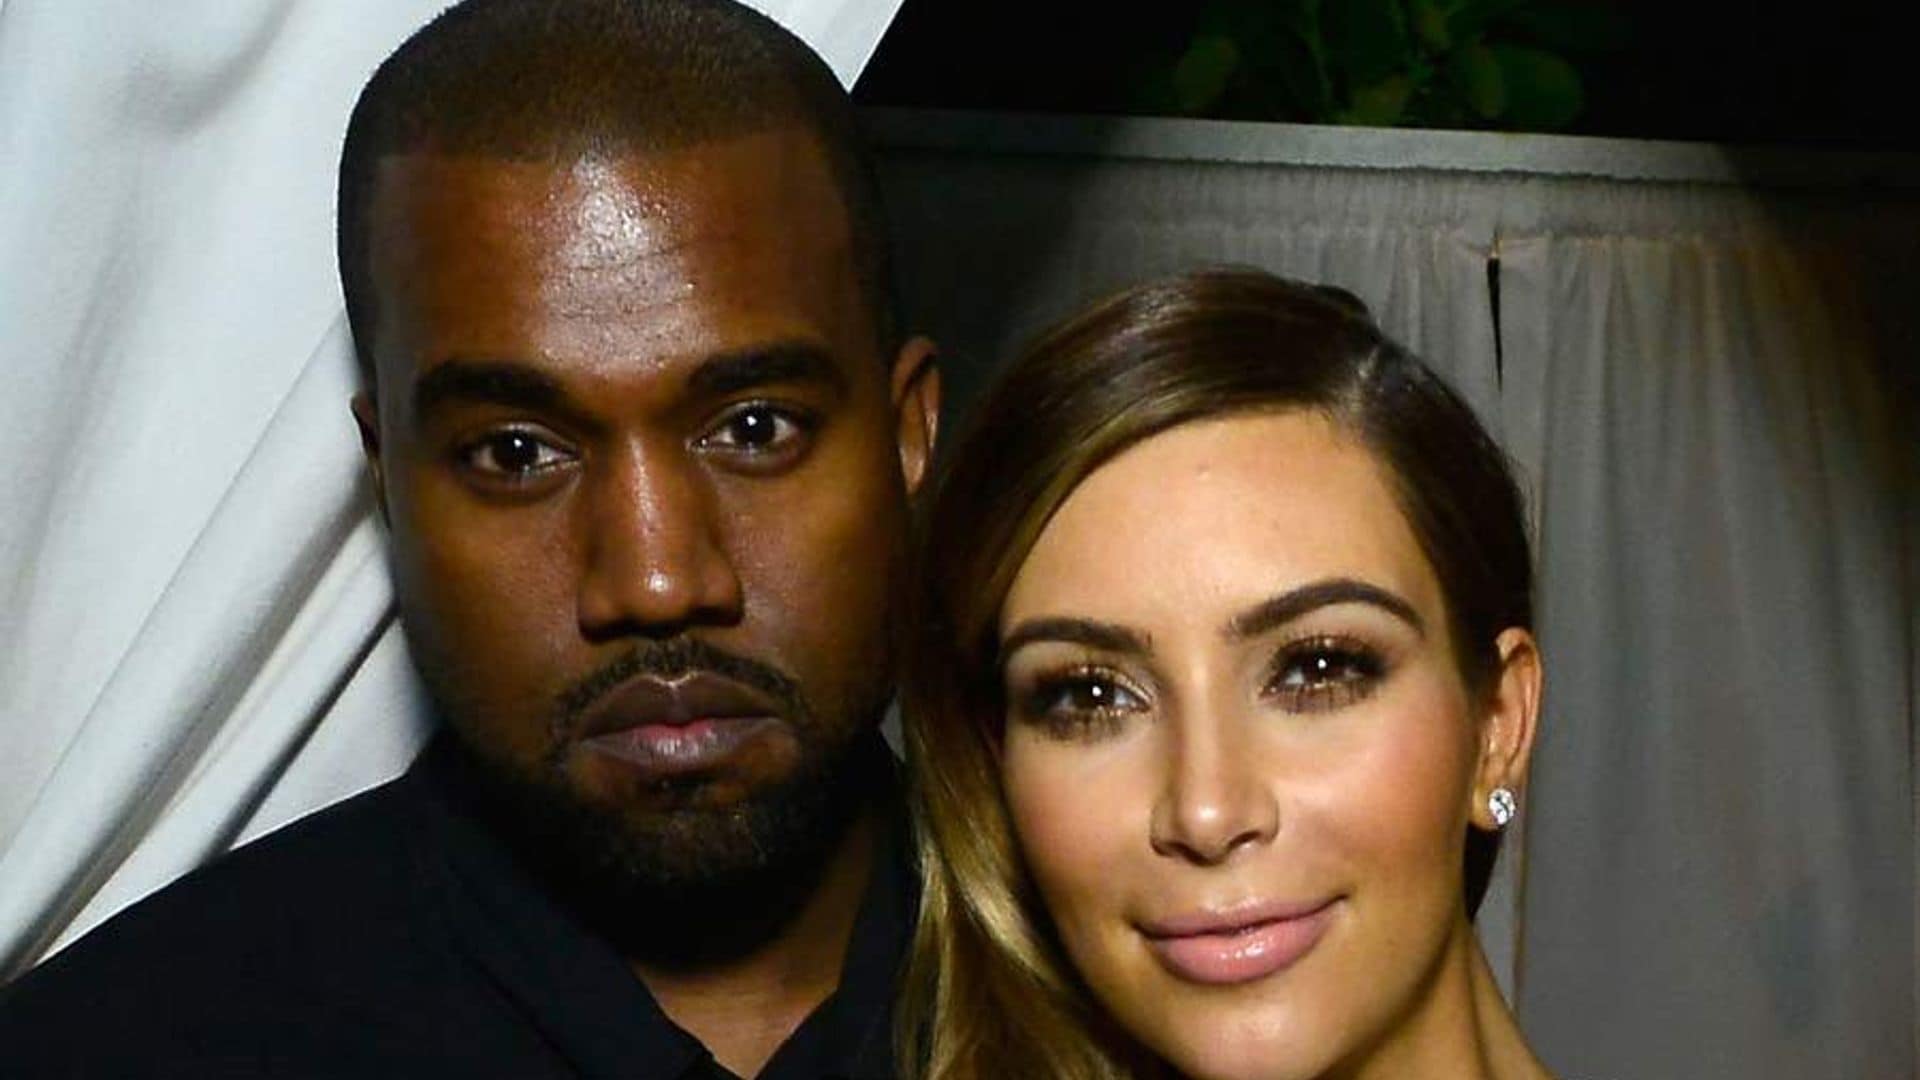 Kanye West pulls out all the stops for Kim Kardashian's Mother's Day